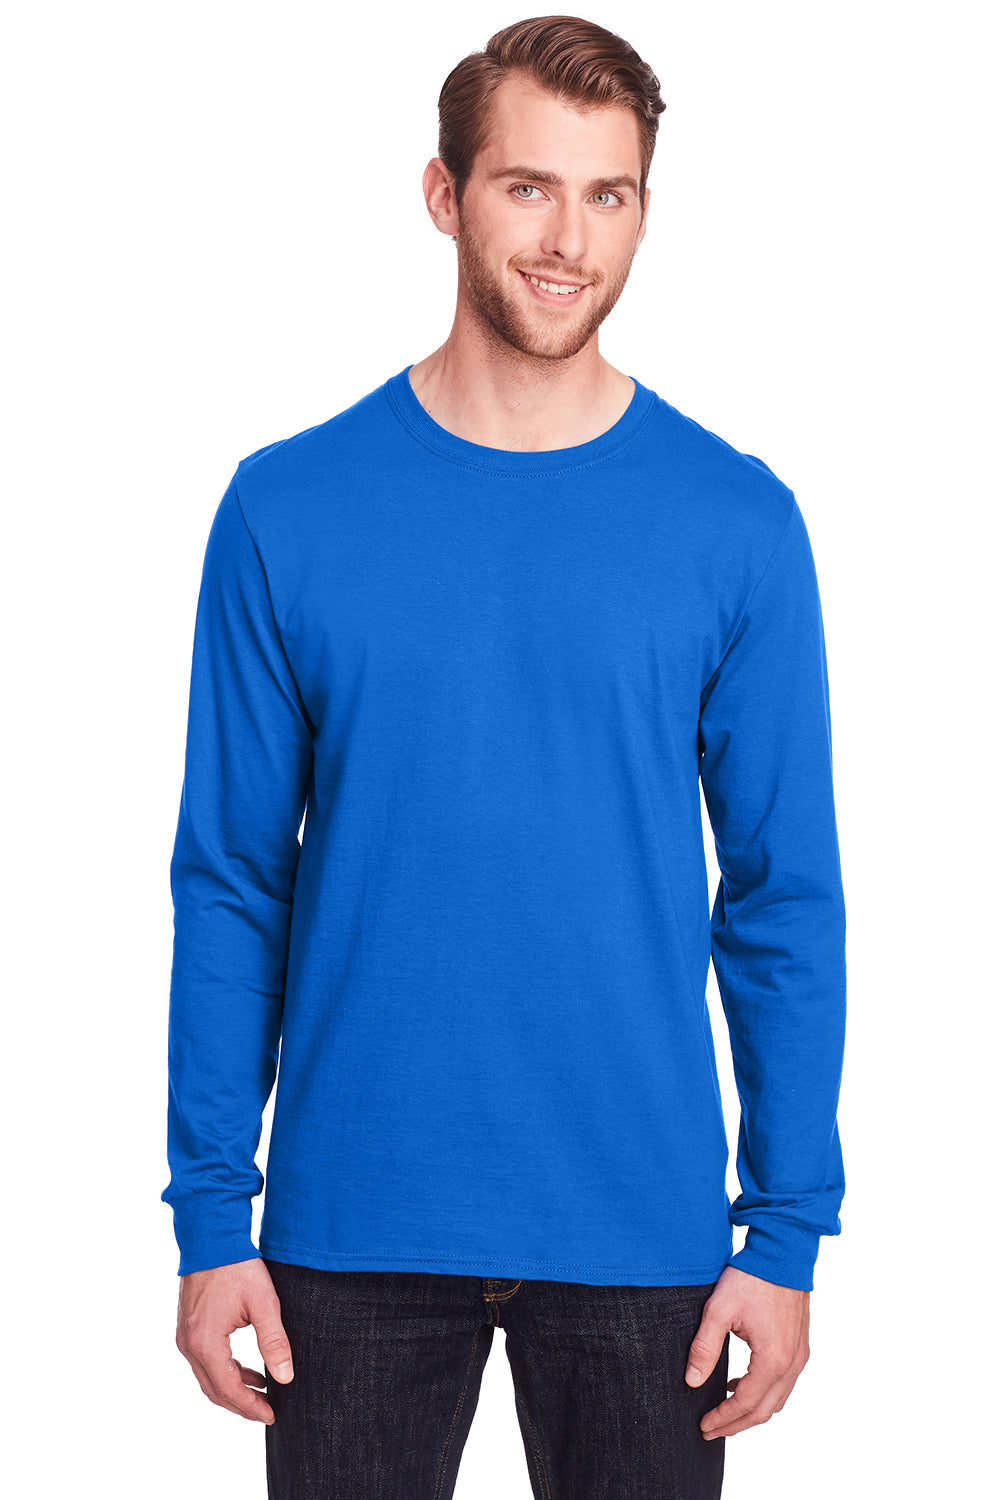 Fruit Of The Loom IC47LSR Mens Iconic Long Sleeve Crewneck T-Shirt Royal Blue Front